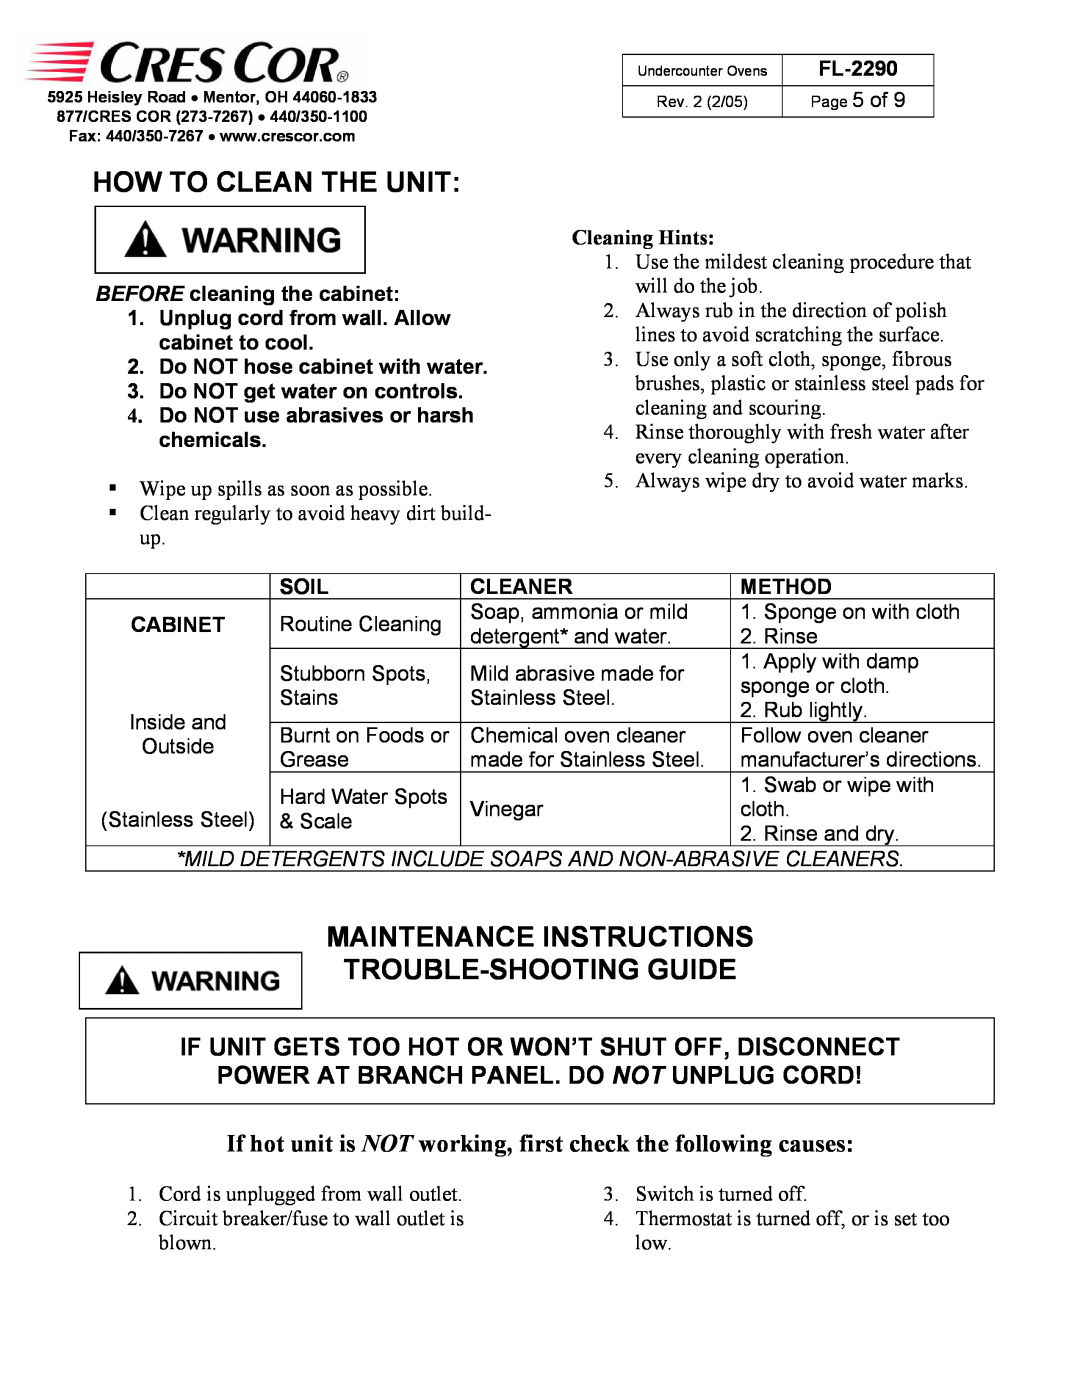 Cres Cor CO151XUA5B How To Clean The Unit, Maintenance Instructions Trouble-Shootingguide, BEFORE cleaning the cabinet 